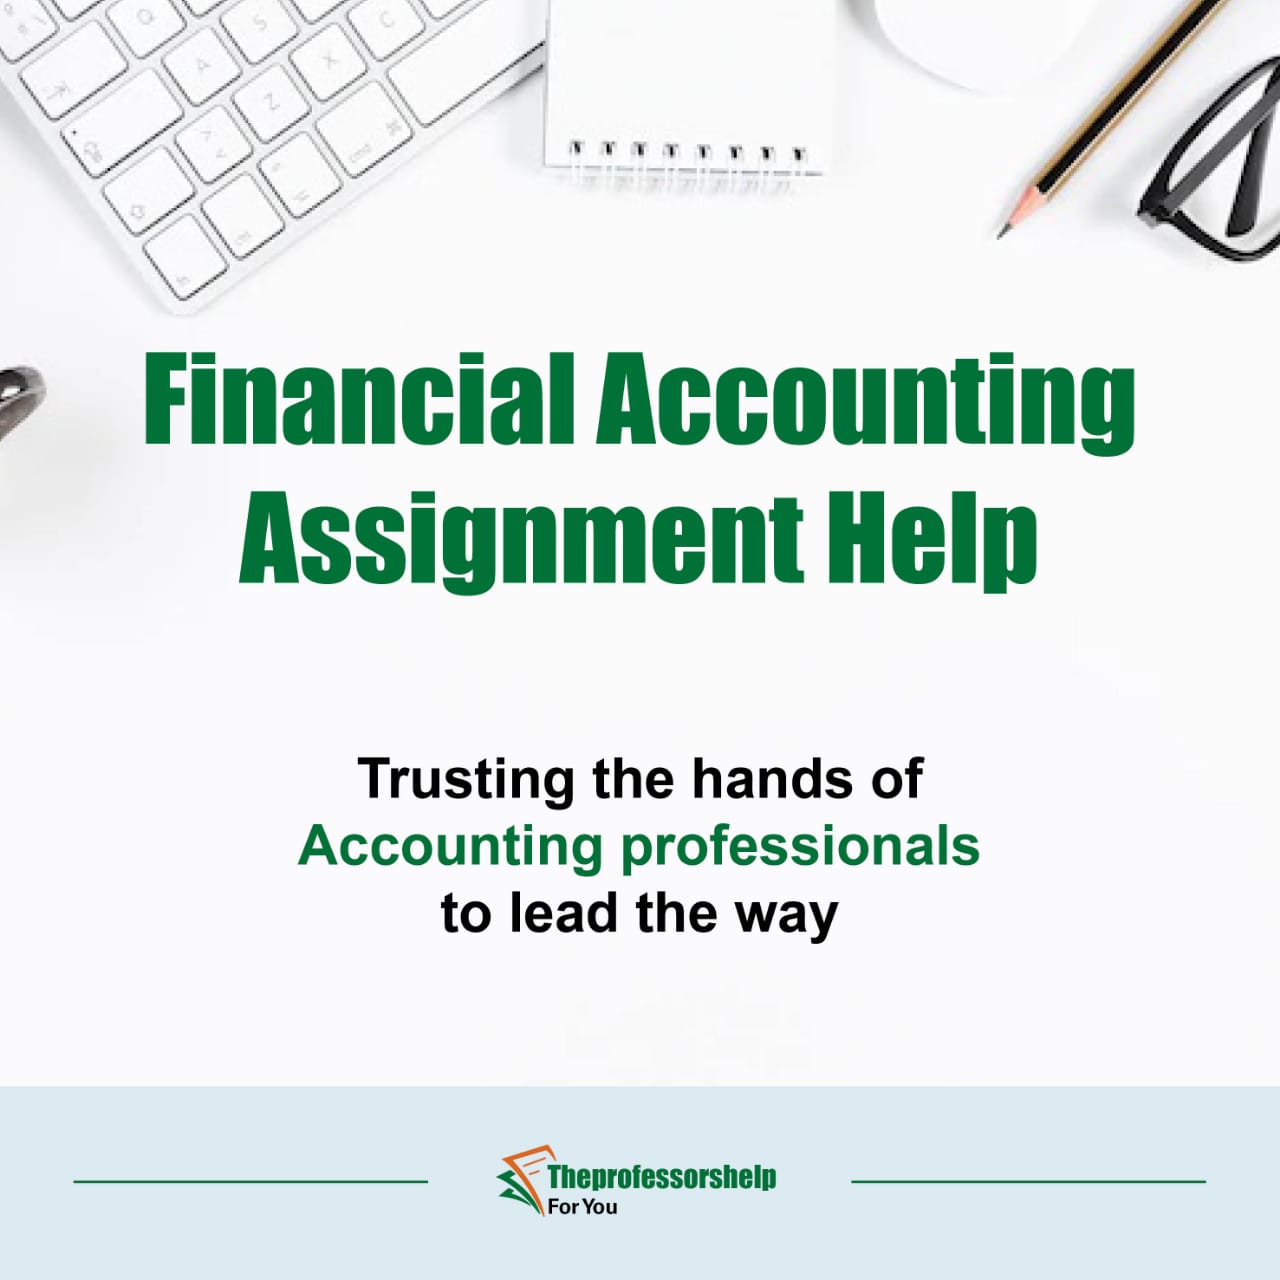 Essay writing service for finacial accounting